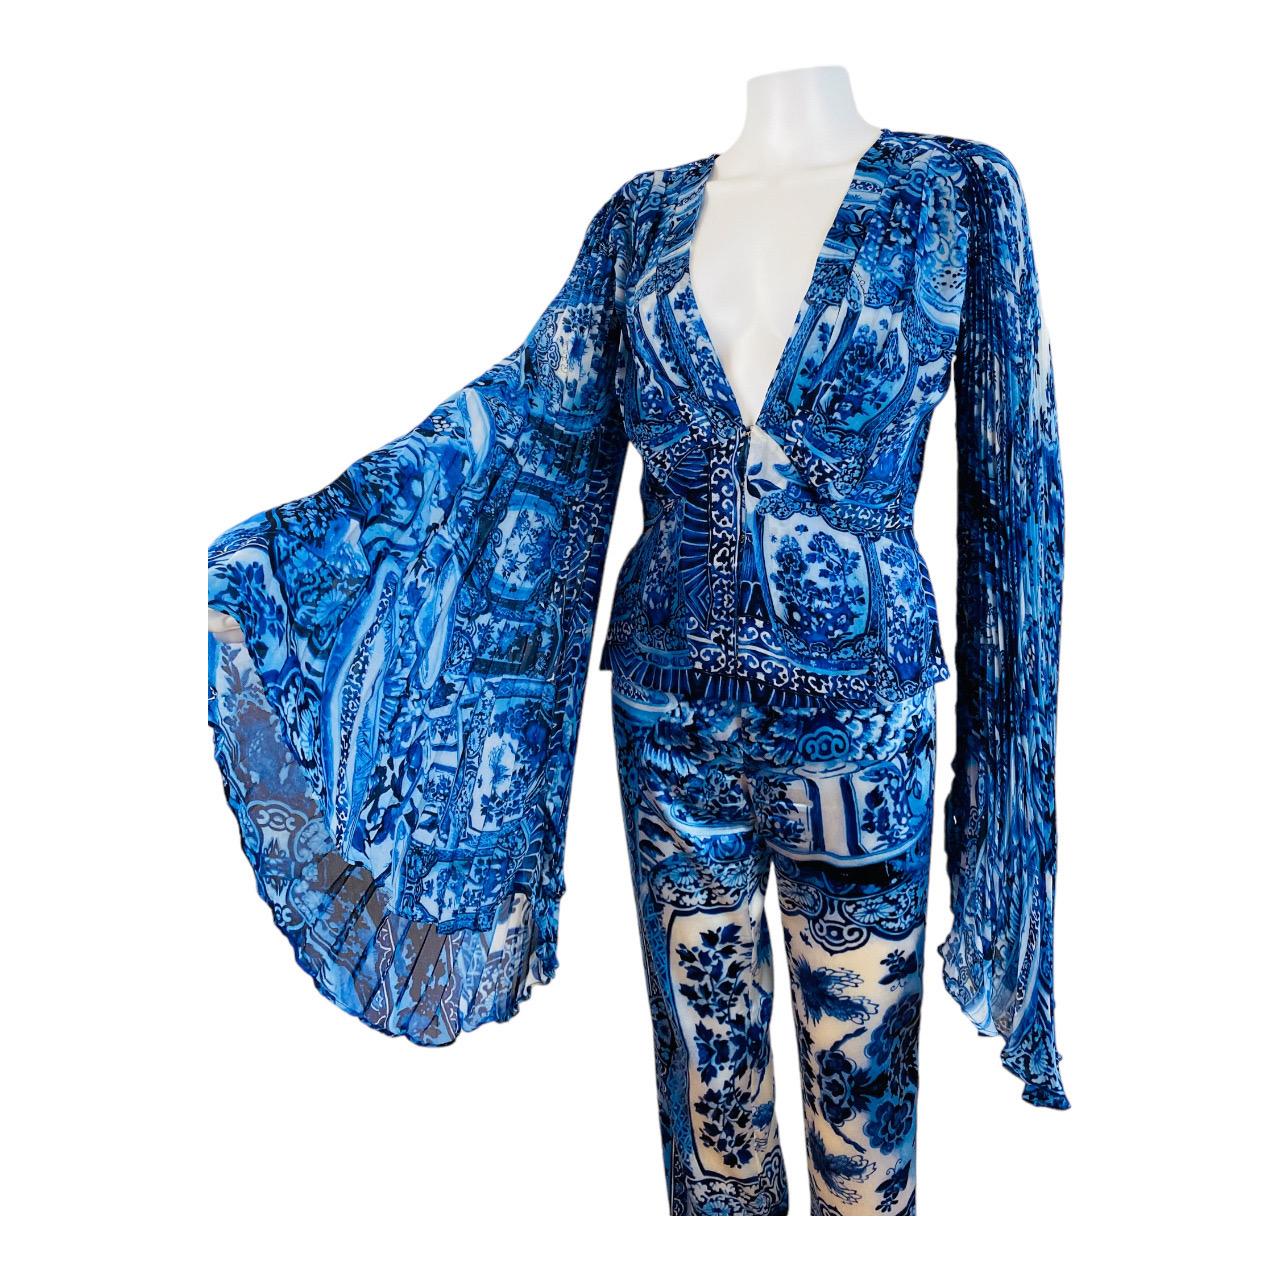 Vintage F/W 2005 Roberto Cavalli Chinoiserie Ming Vase Dragon Pants + 3 Tops In Excellent Condition For Sale In Denver, CO